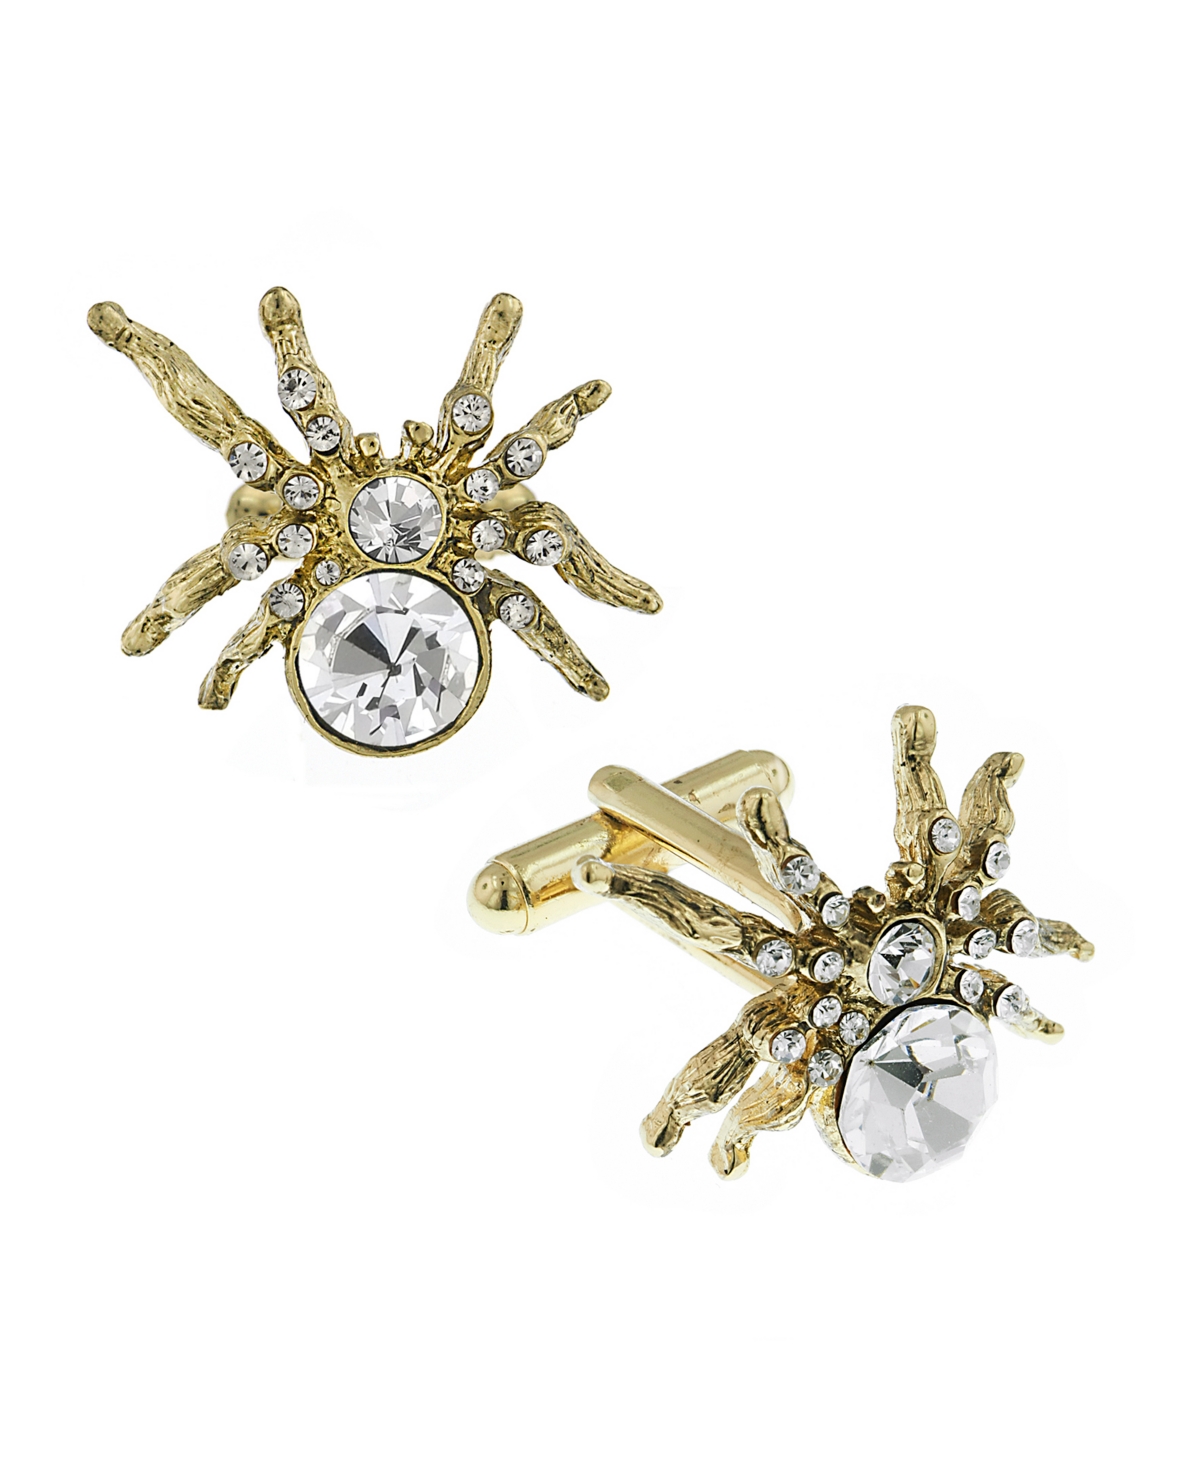 1928 Jewelry 14k Gold Plated Crystal Spider Cufflinks